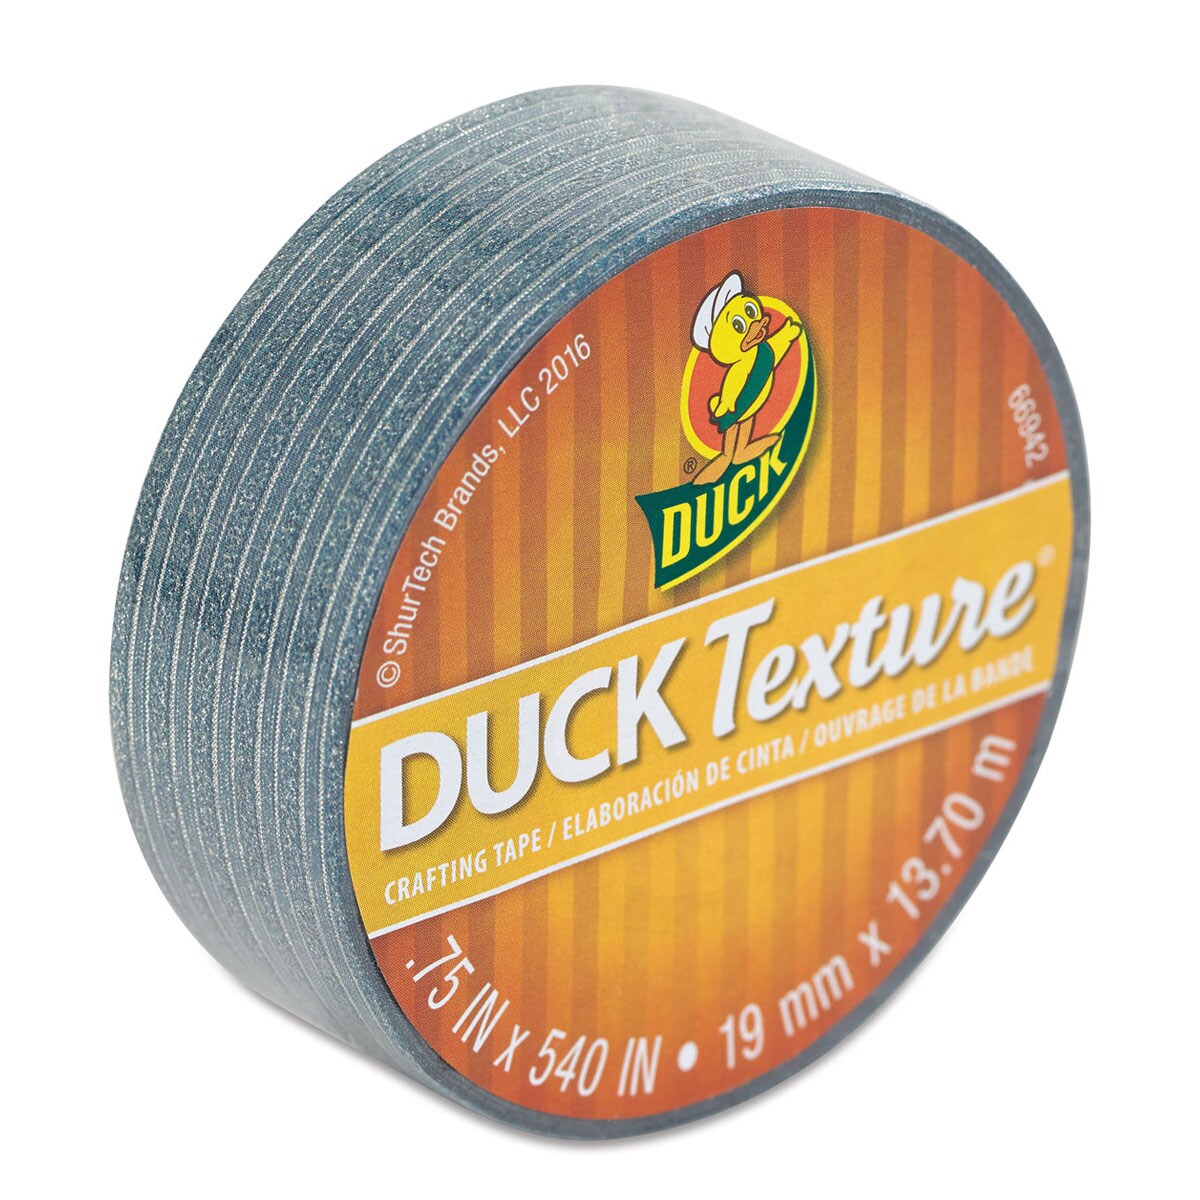 Duck Tape® Woodgrain Patterned Brand Duct Tape